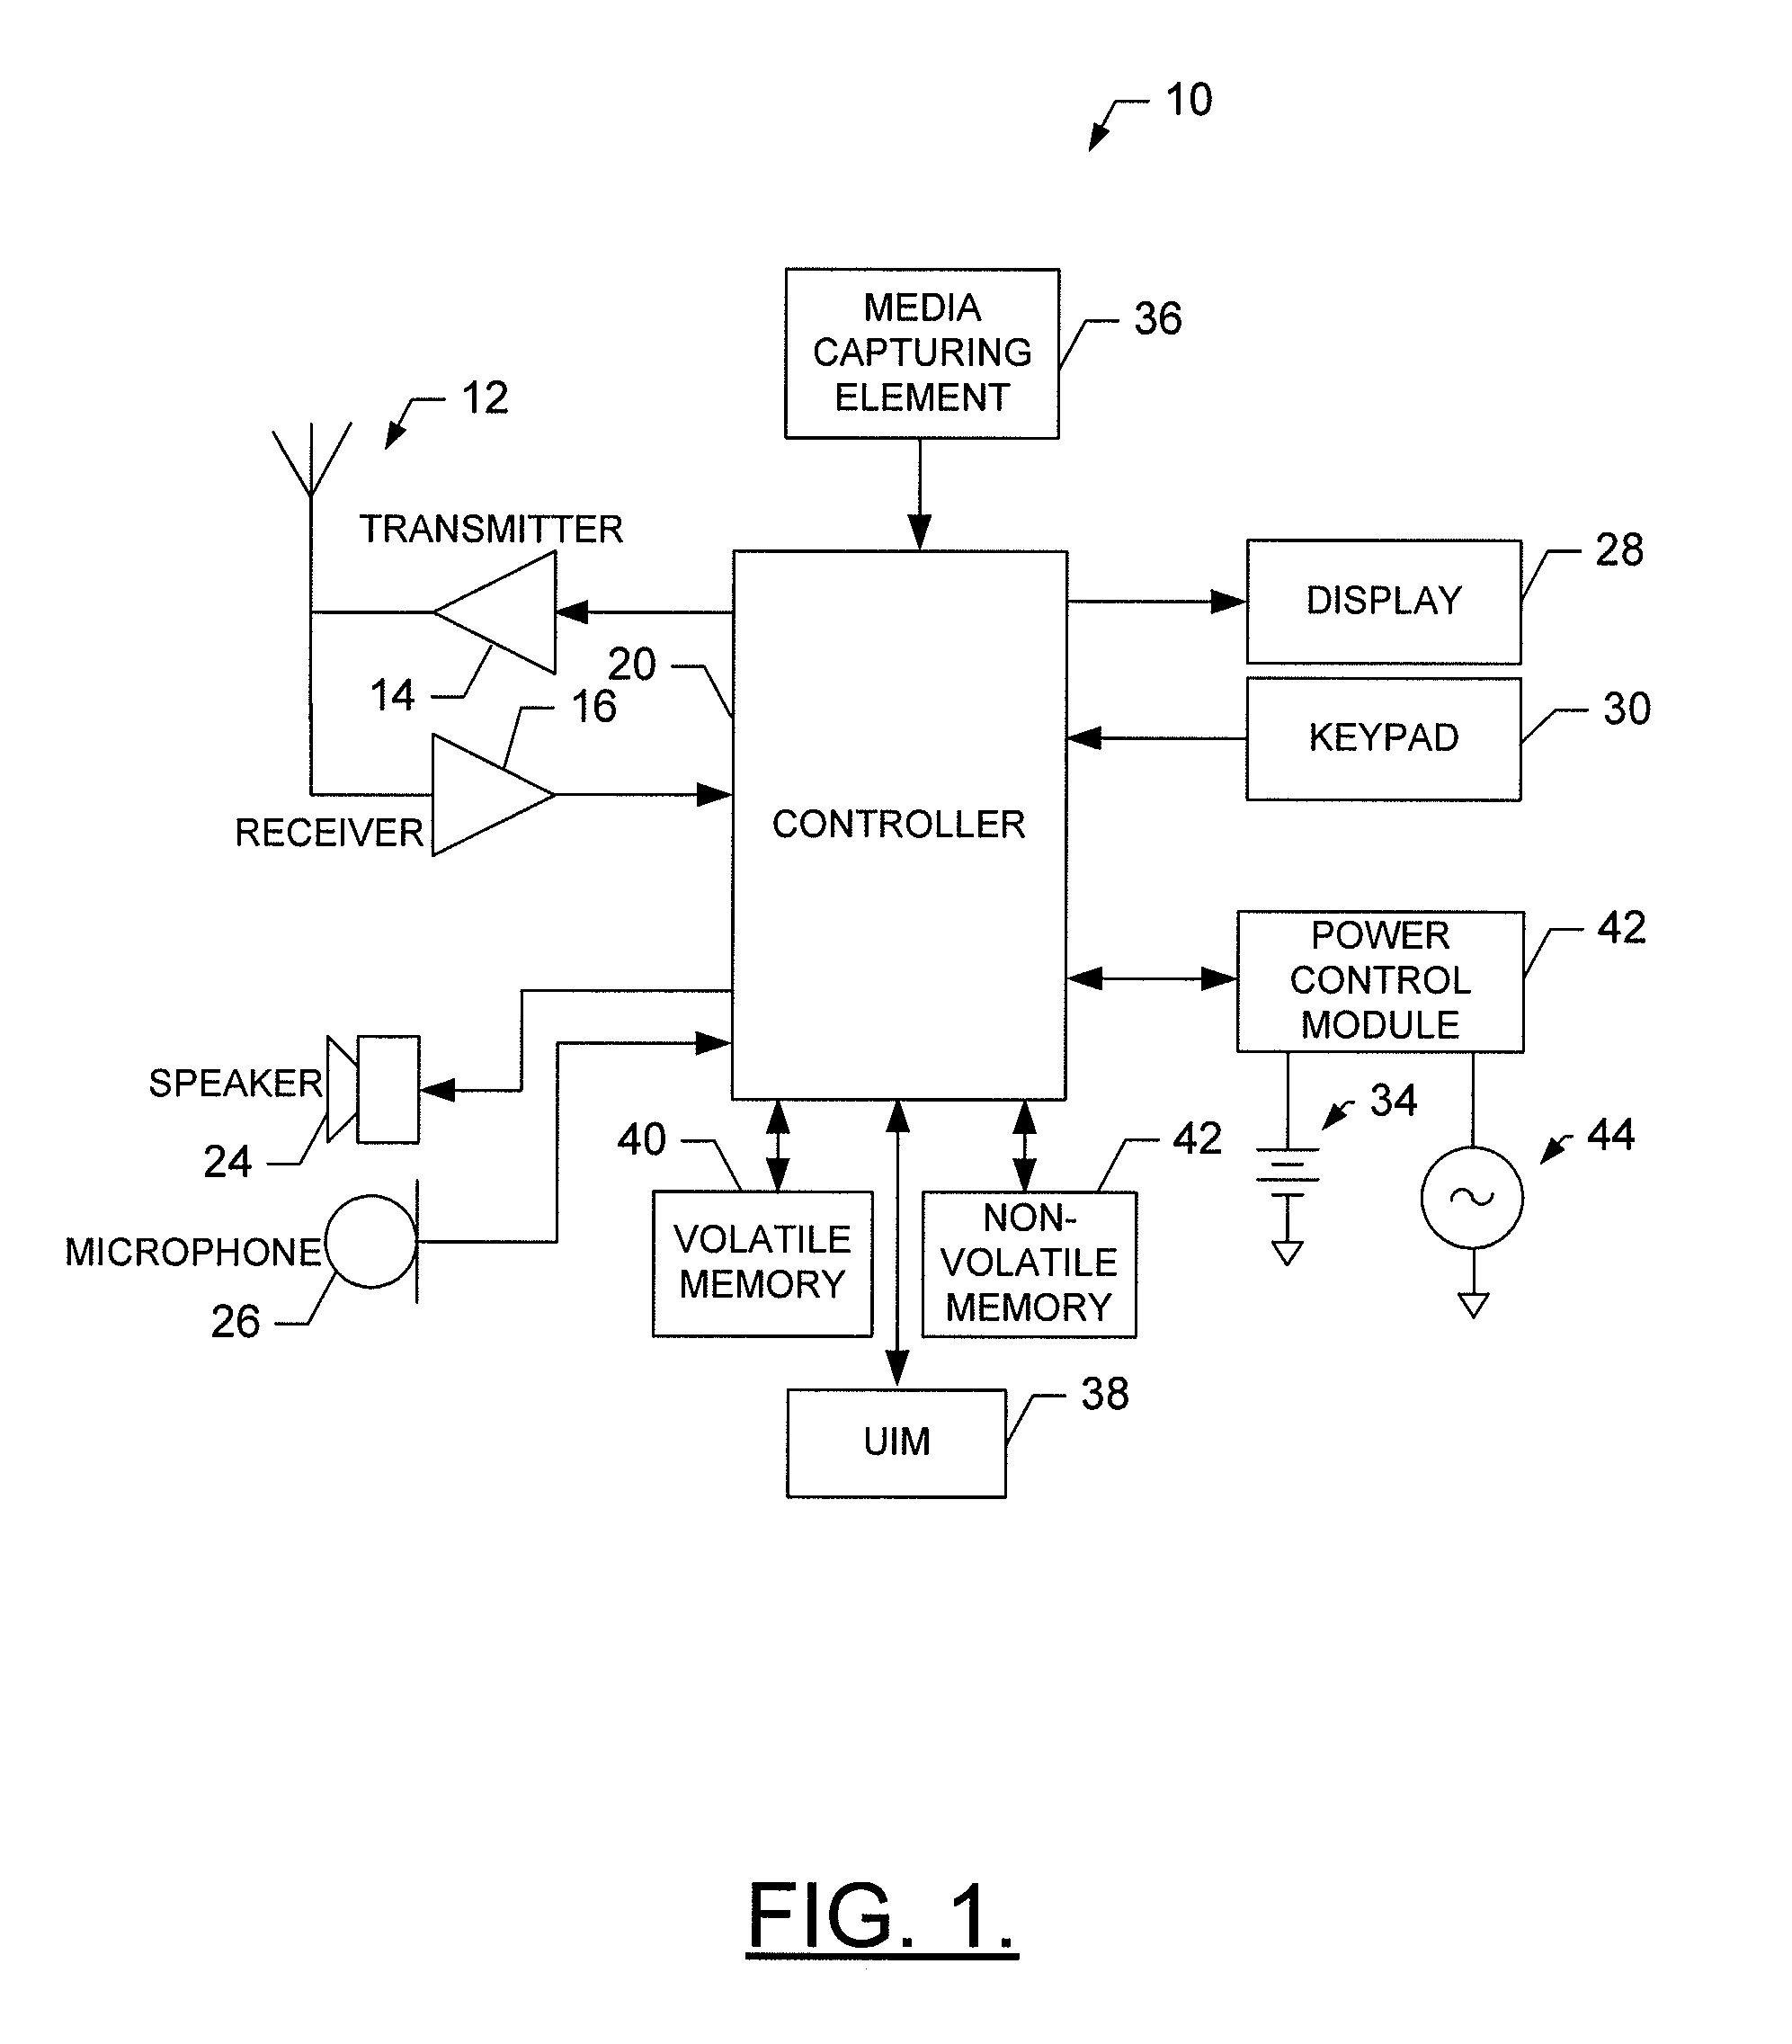 Method, apparatus and computer program product for providing power control security features